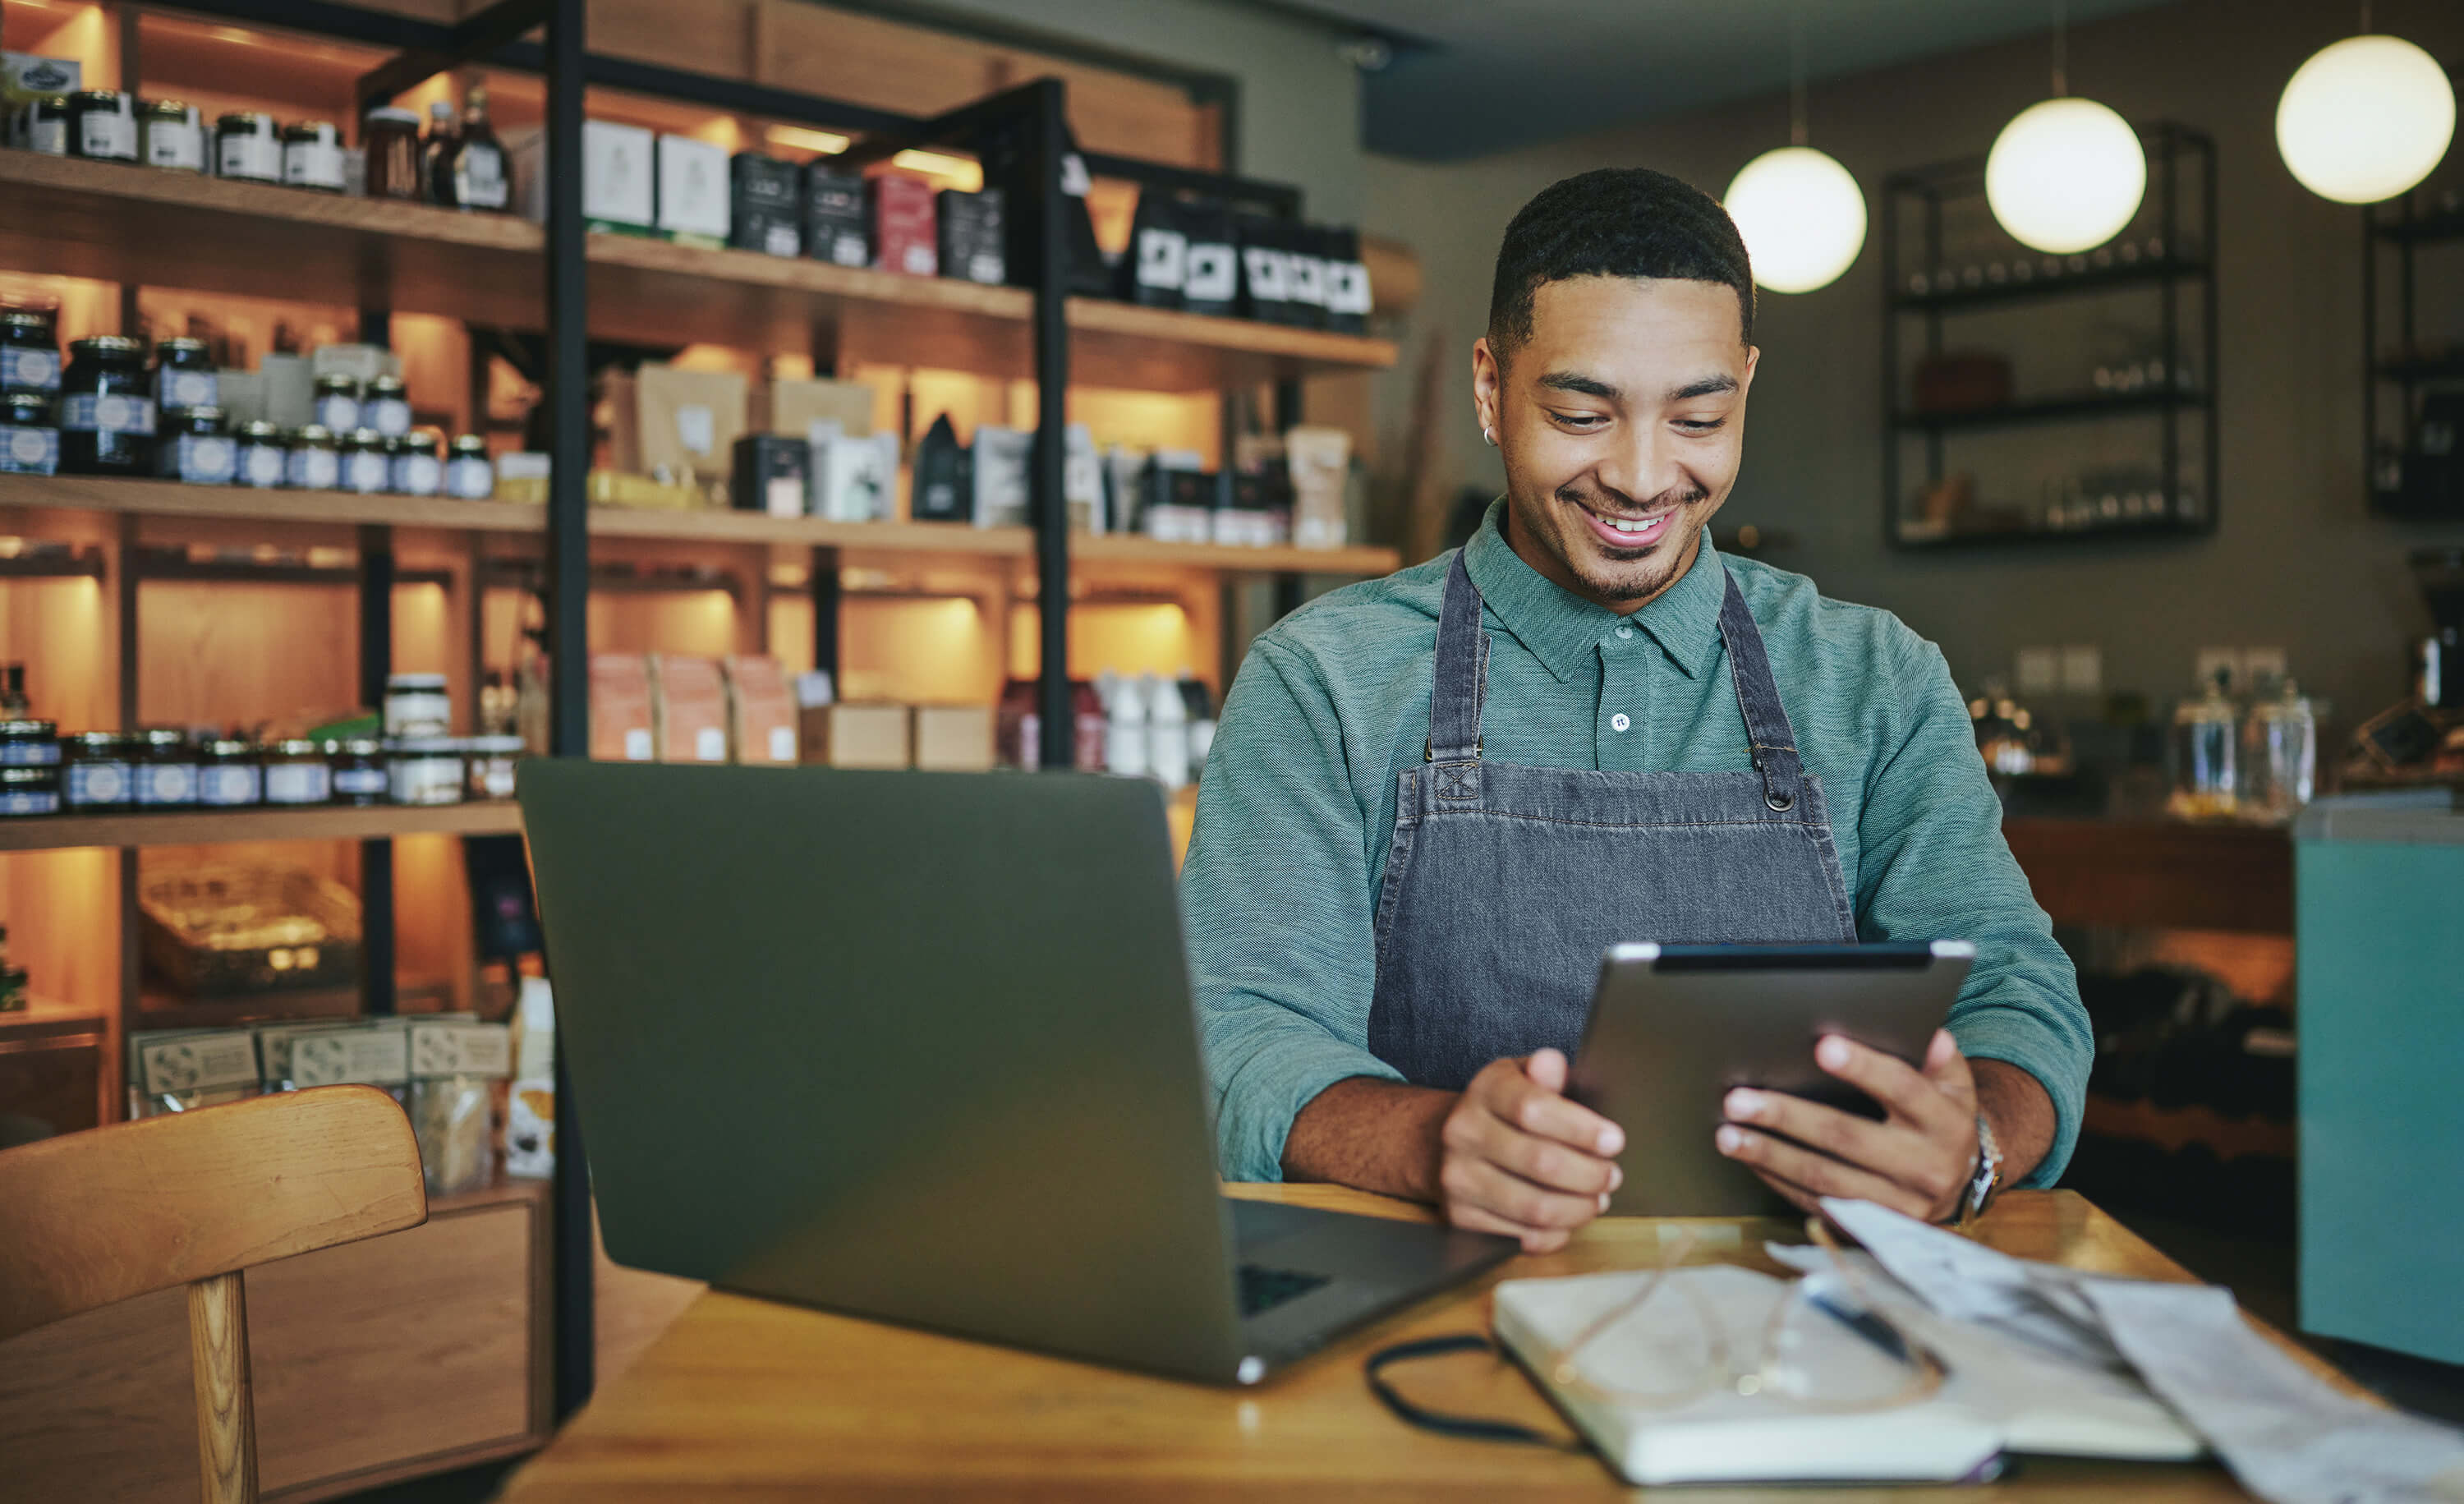 A black male small business owner wearing an apron stands at a table in his retail store and smiles as he looks down at his tablet.